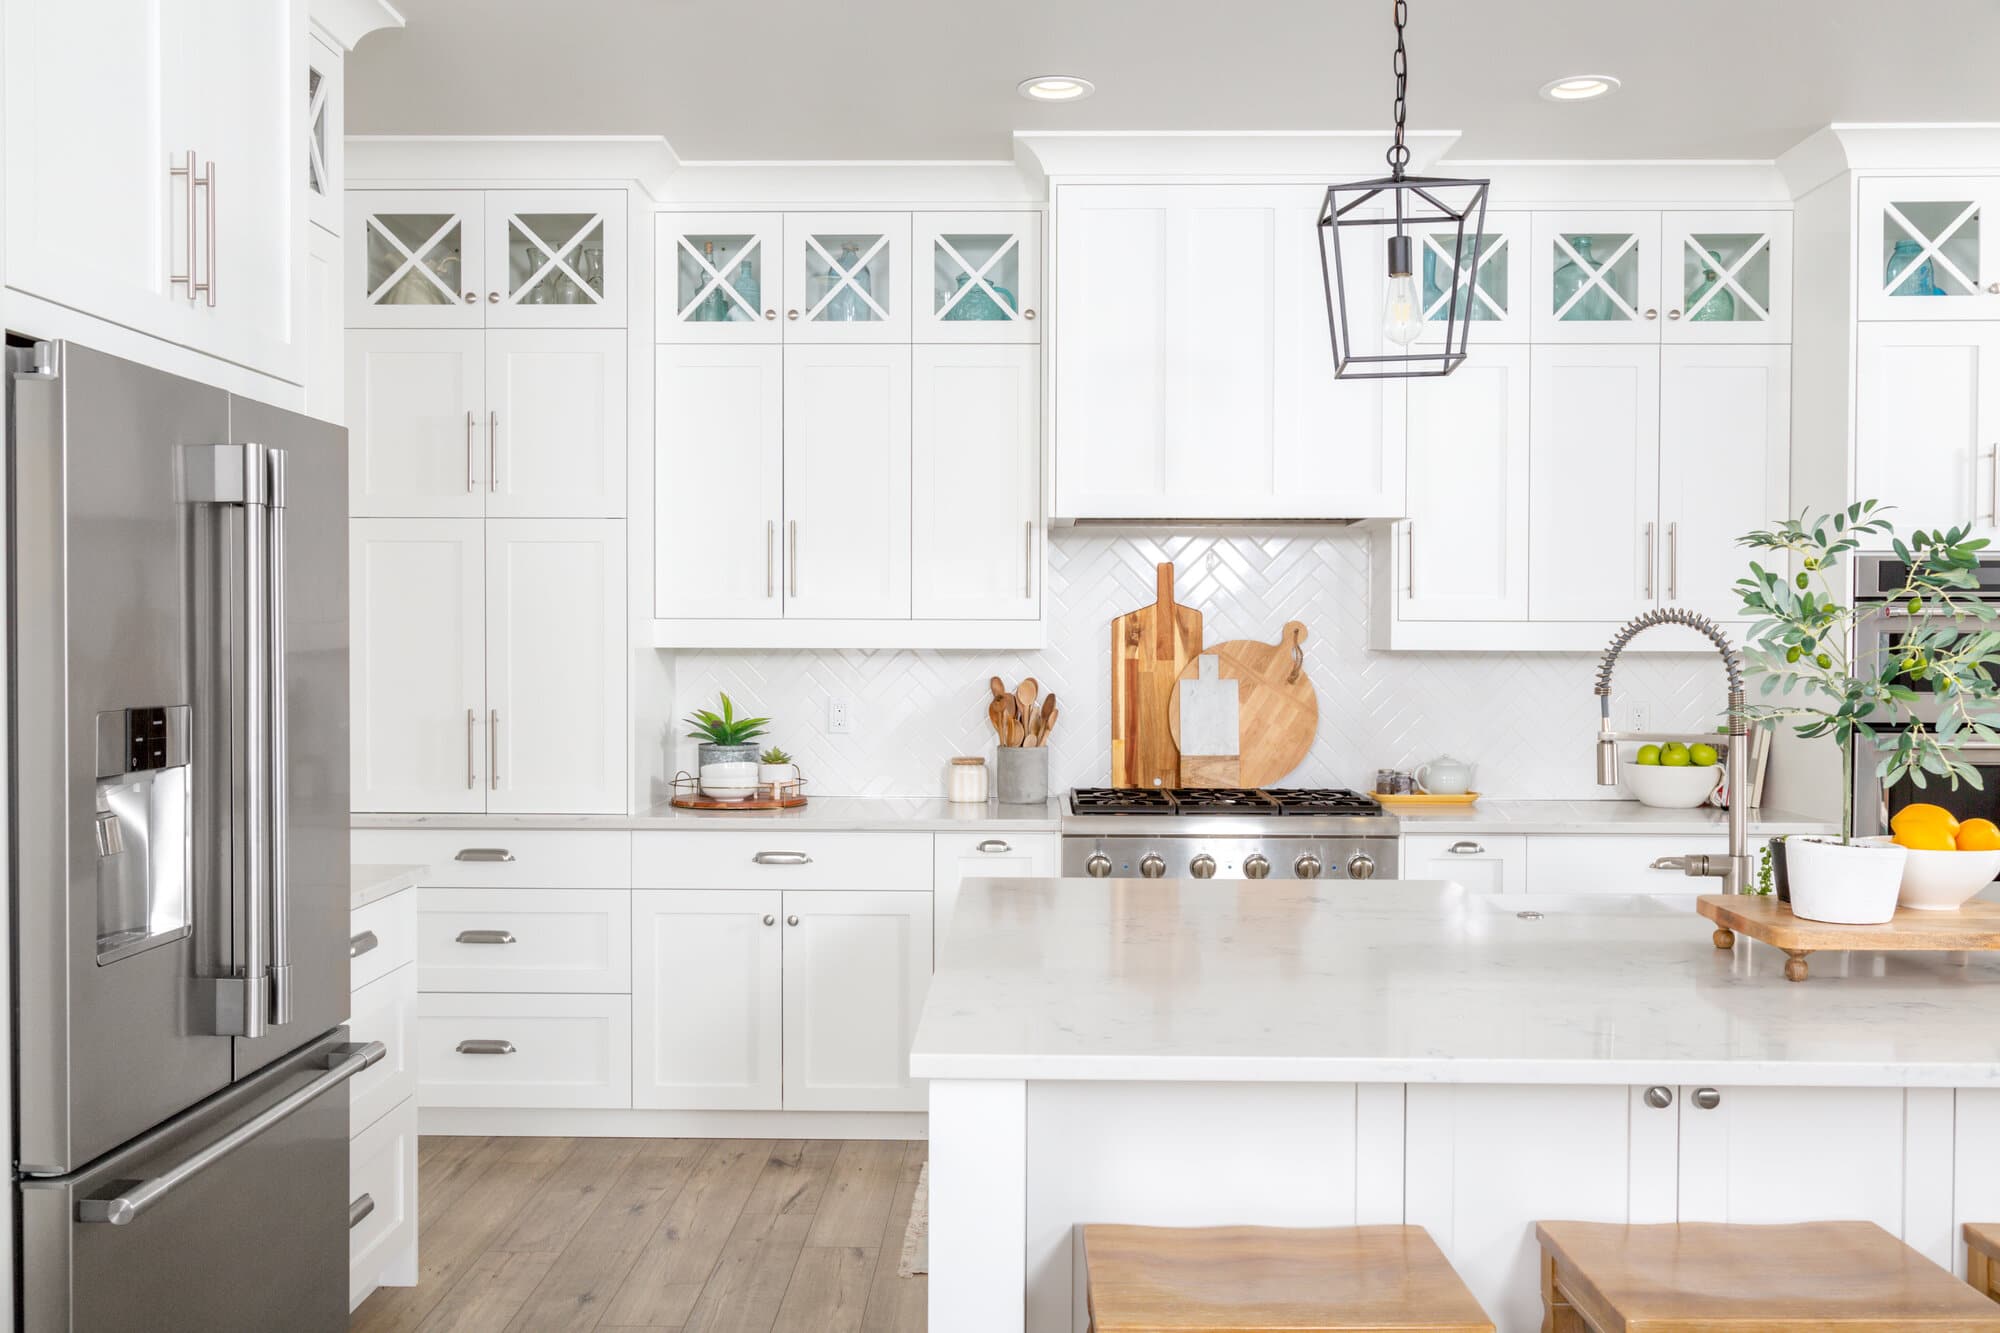 A bright white kitchen with white countertops, stainless steel fridge, and white cabinets.